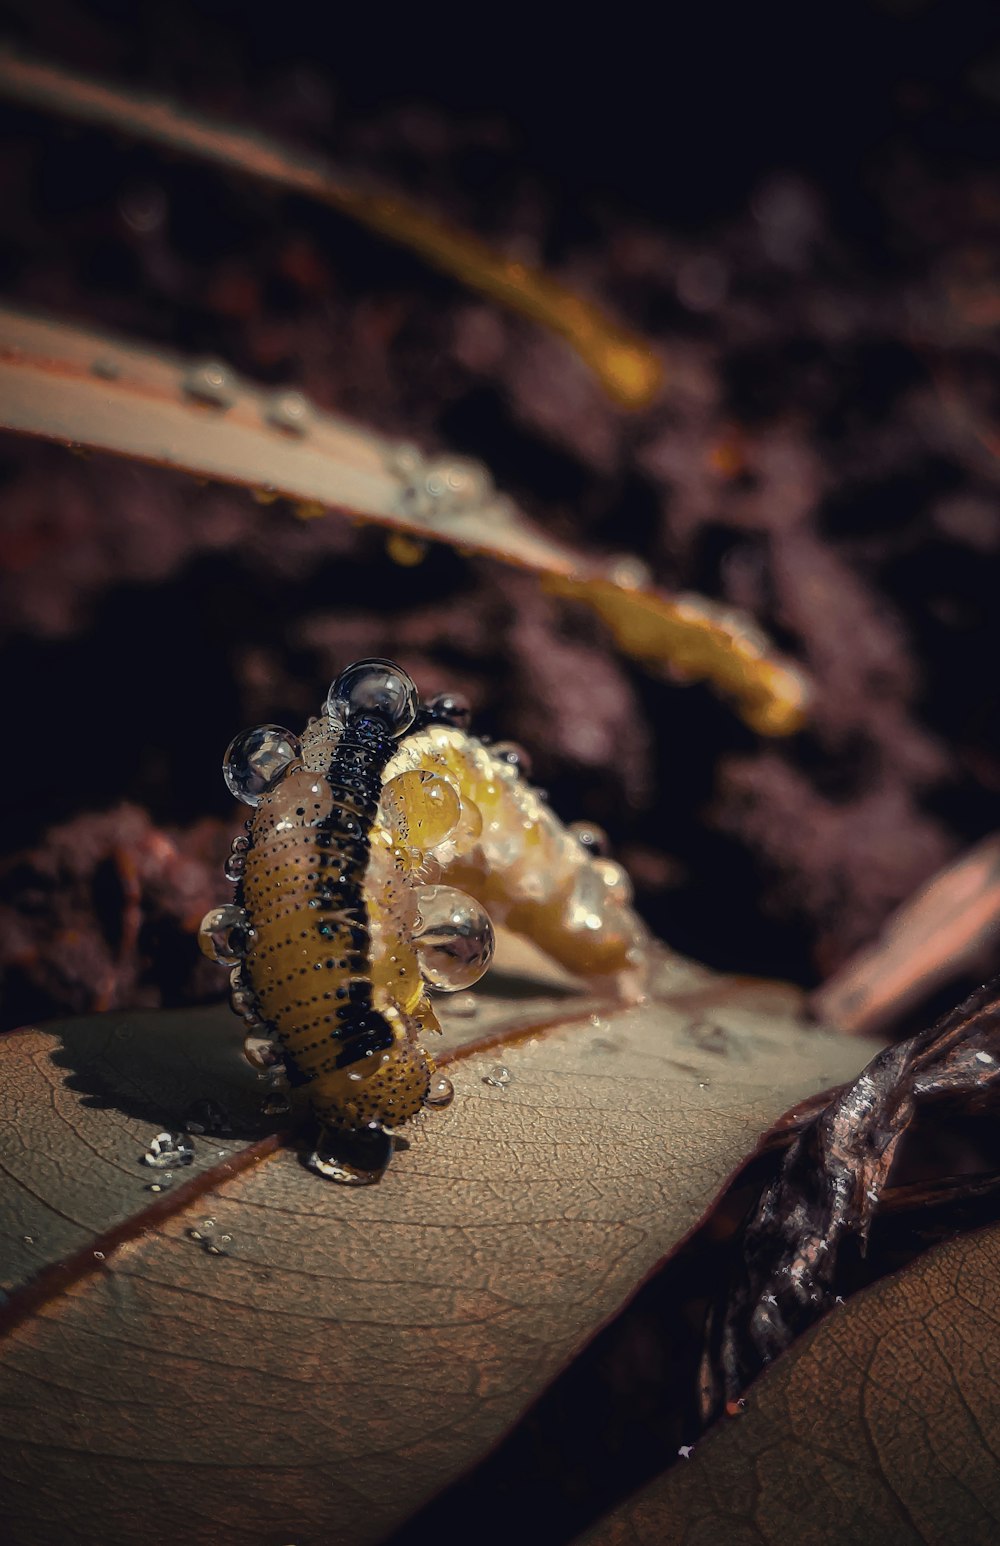 brown and black caterpillar on brown leaf in close up photography